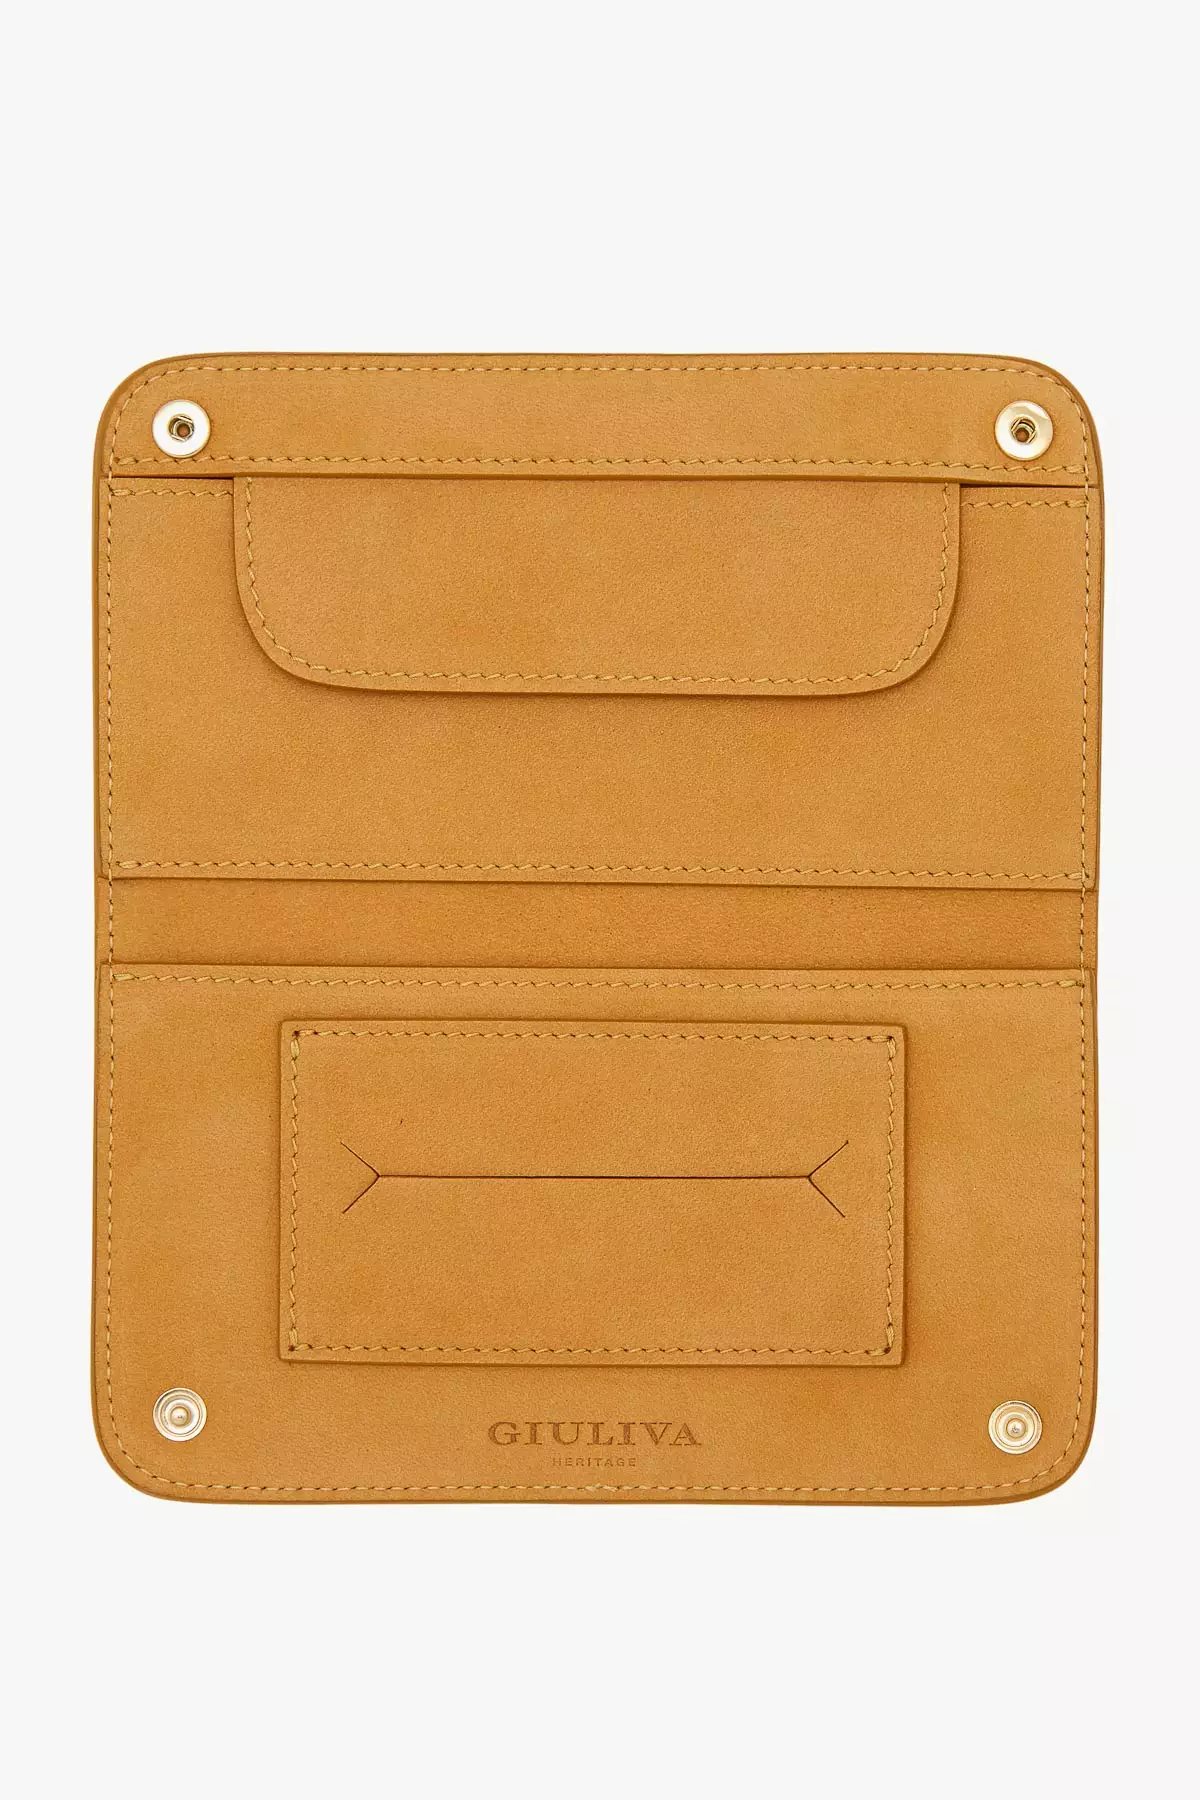 Tobacco Pouch in Wool Tweed and Suede - Giuliva Heritage